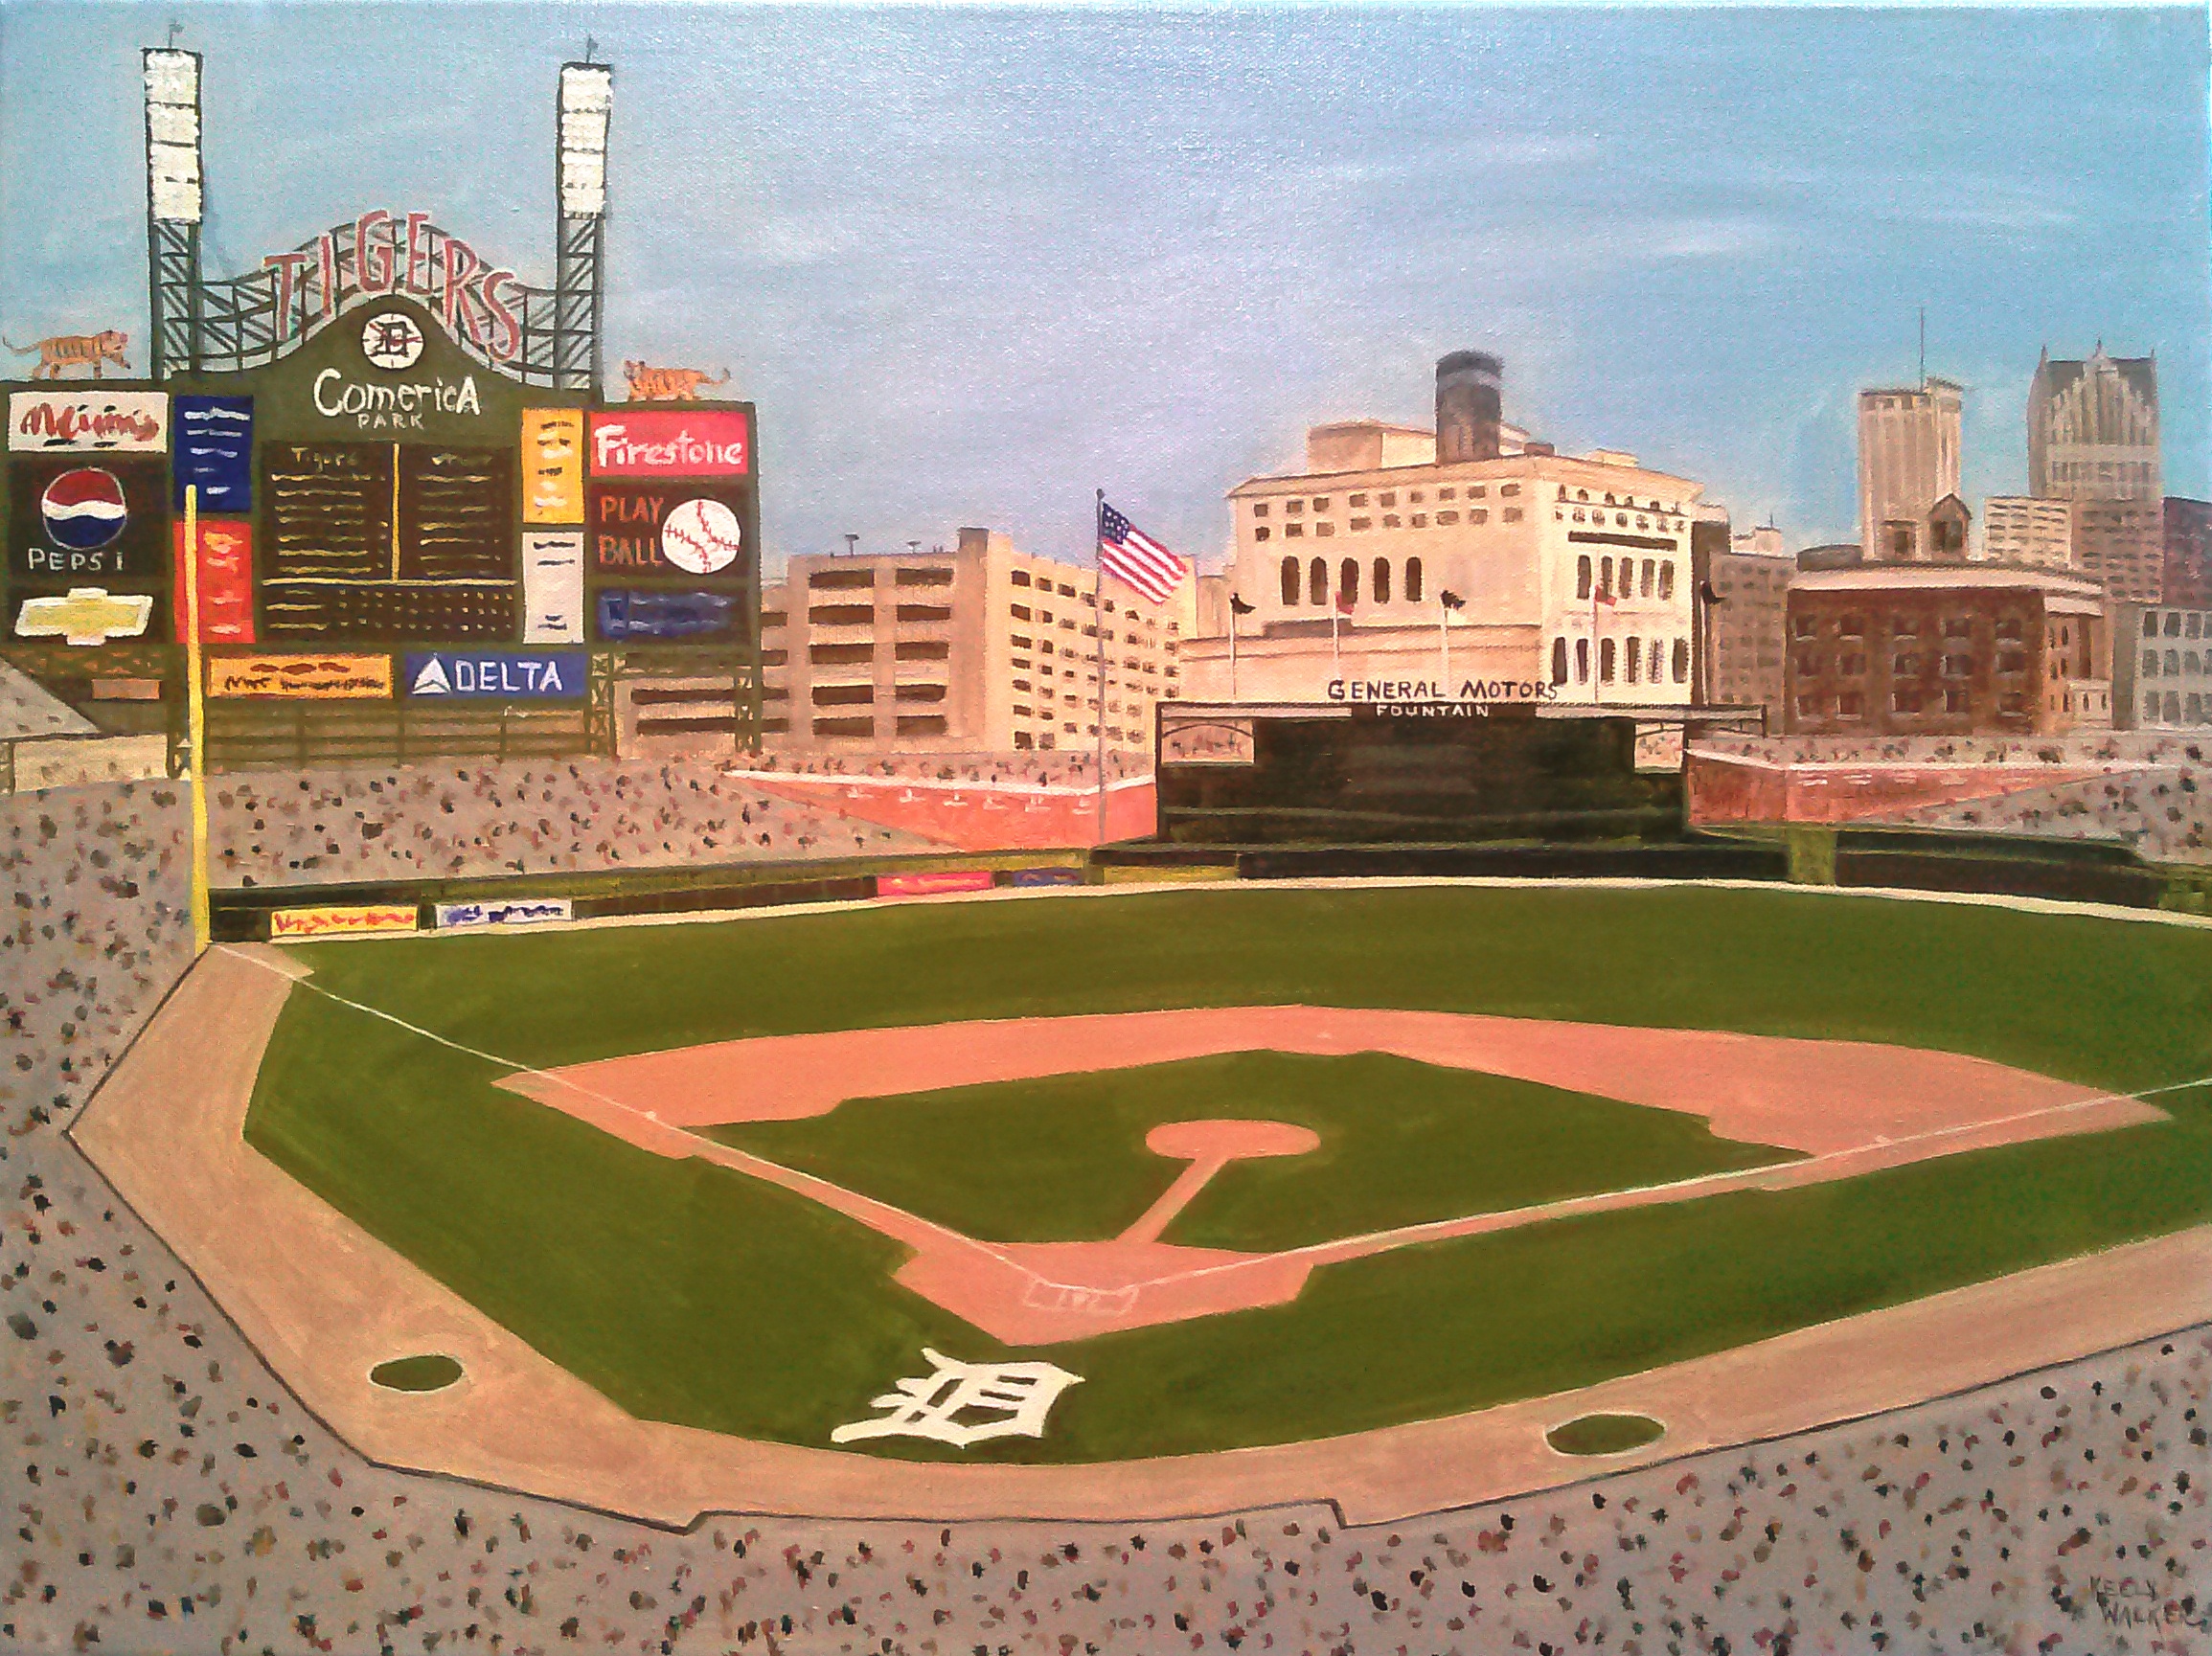 Detroit Tigers' Comerica Park. A Place for Learning